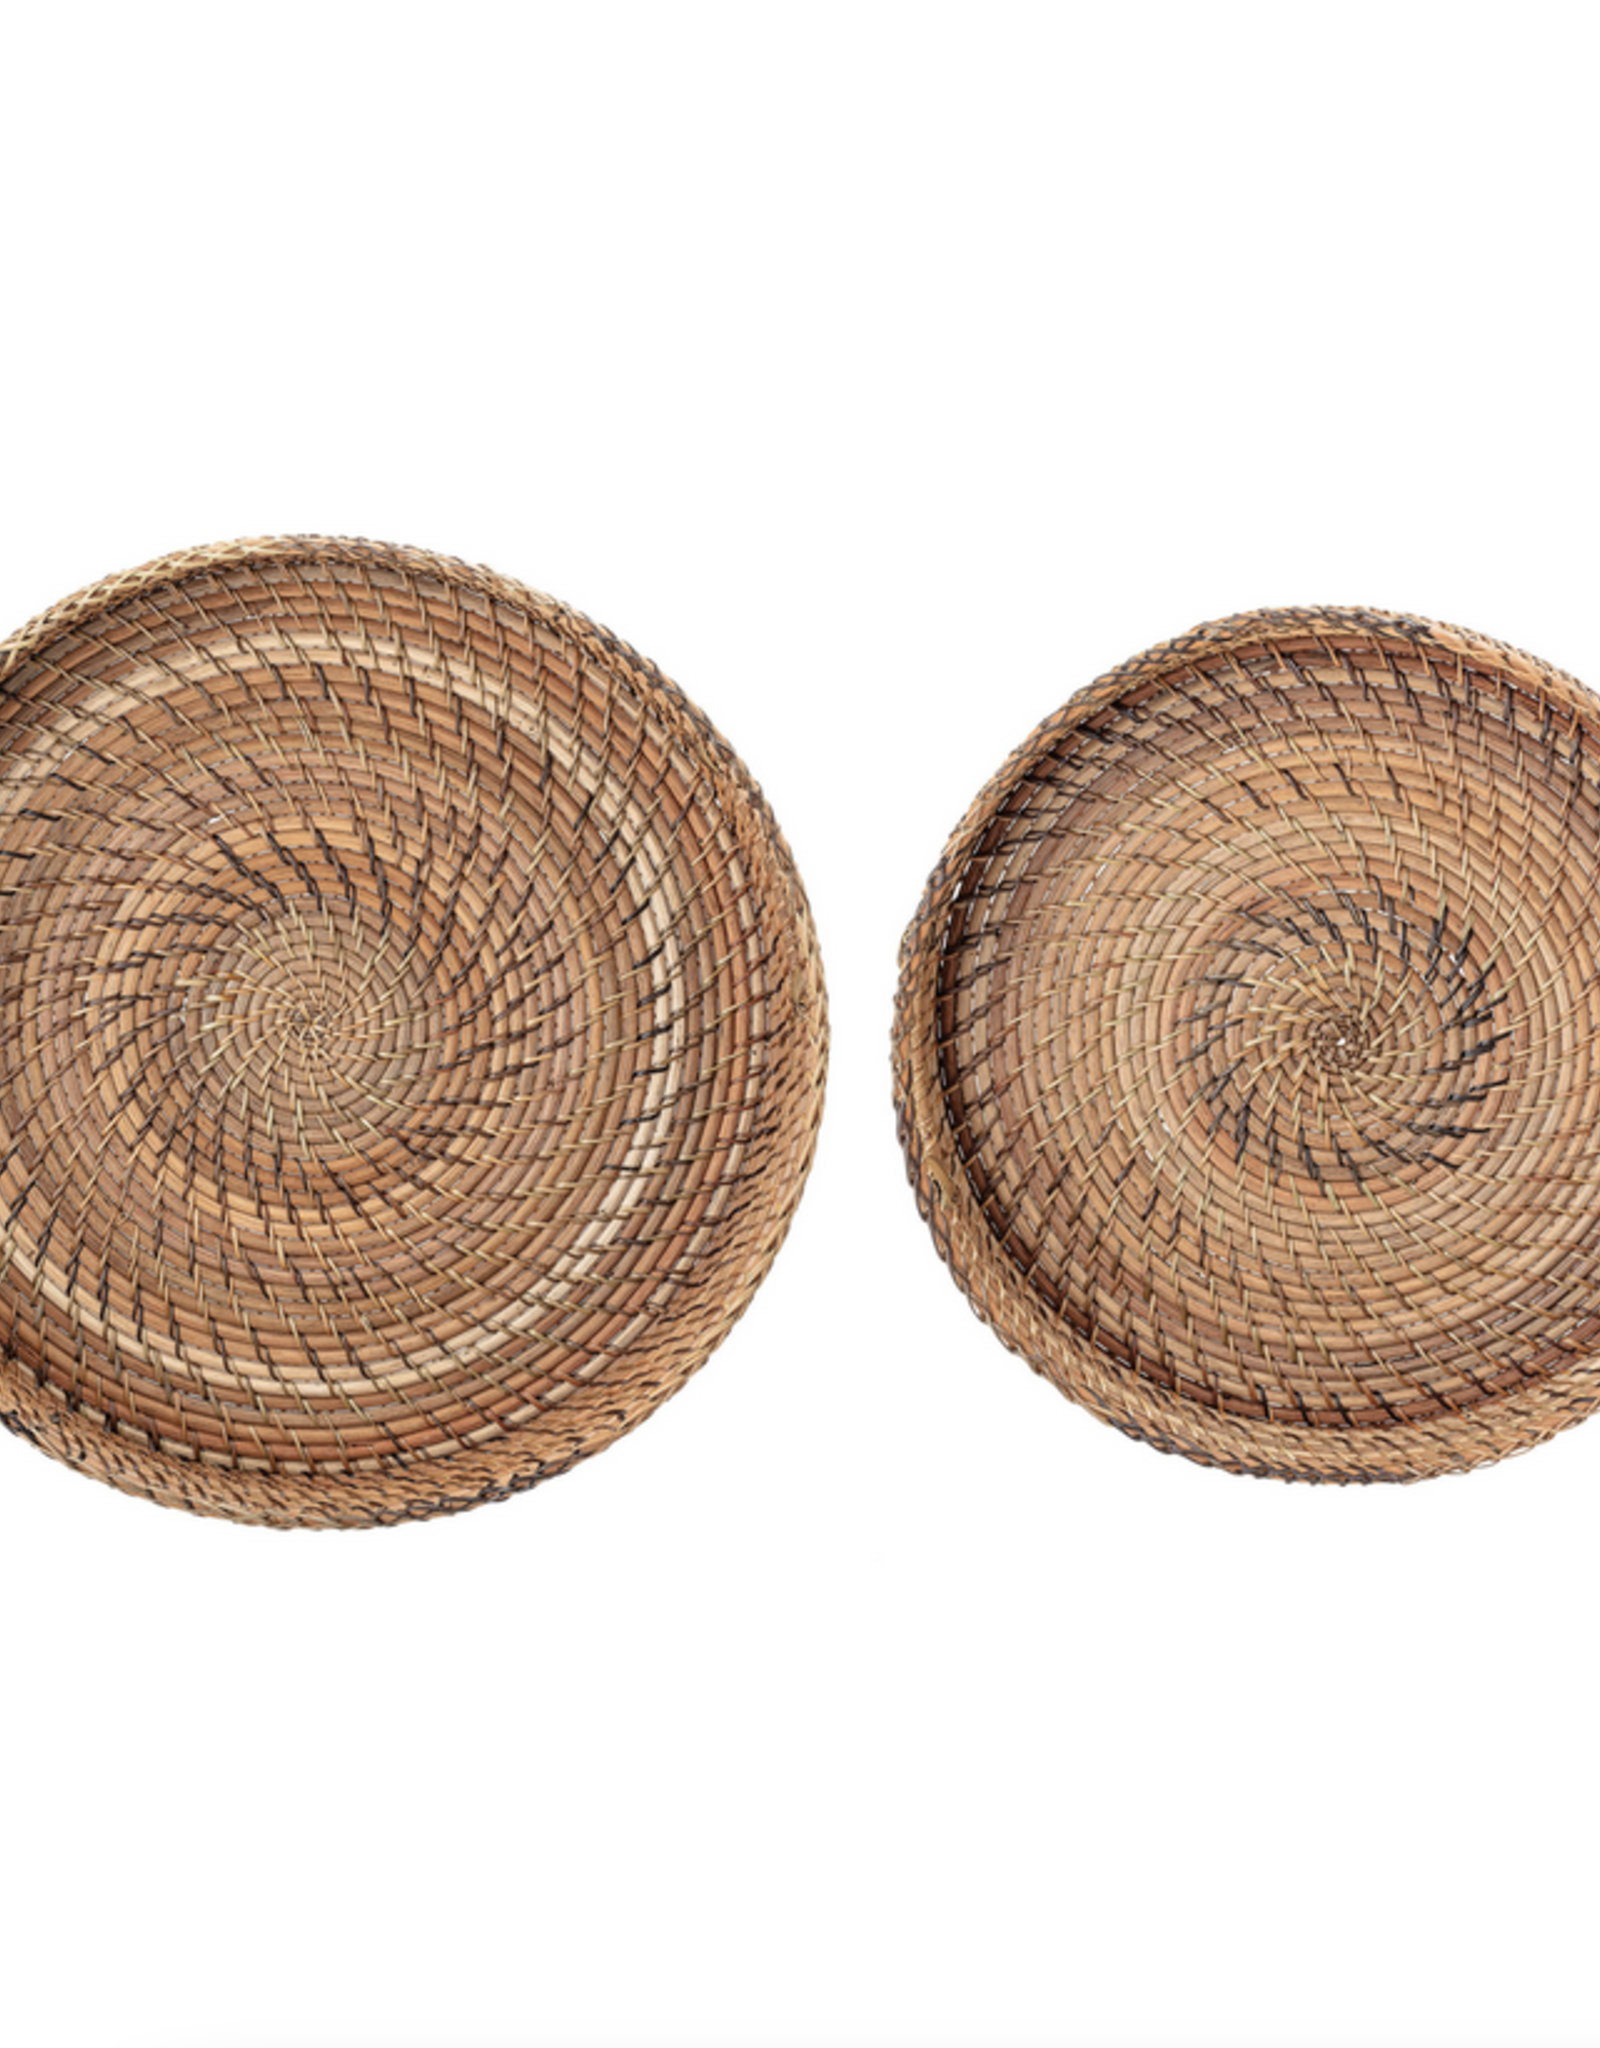 Basket Tray Rattan Round With Handles